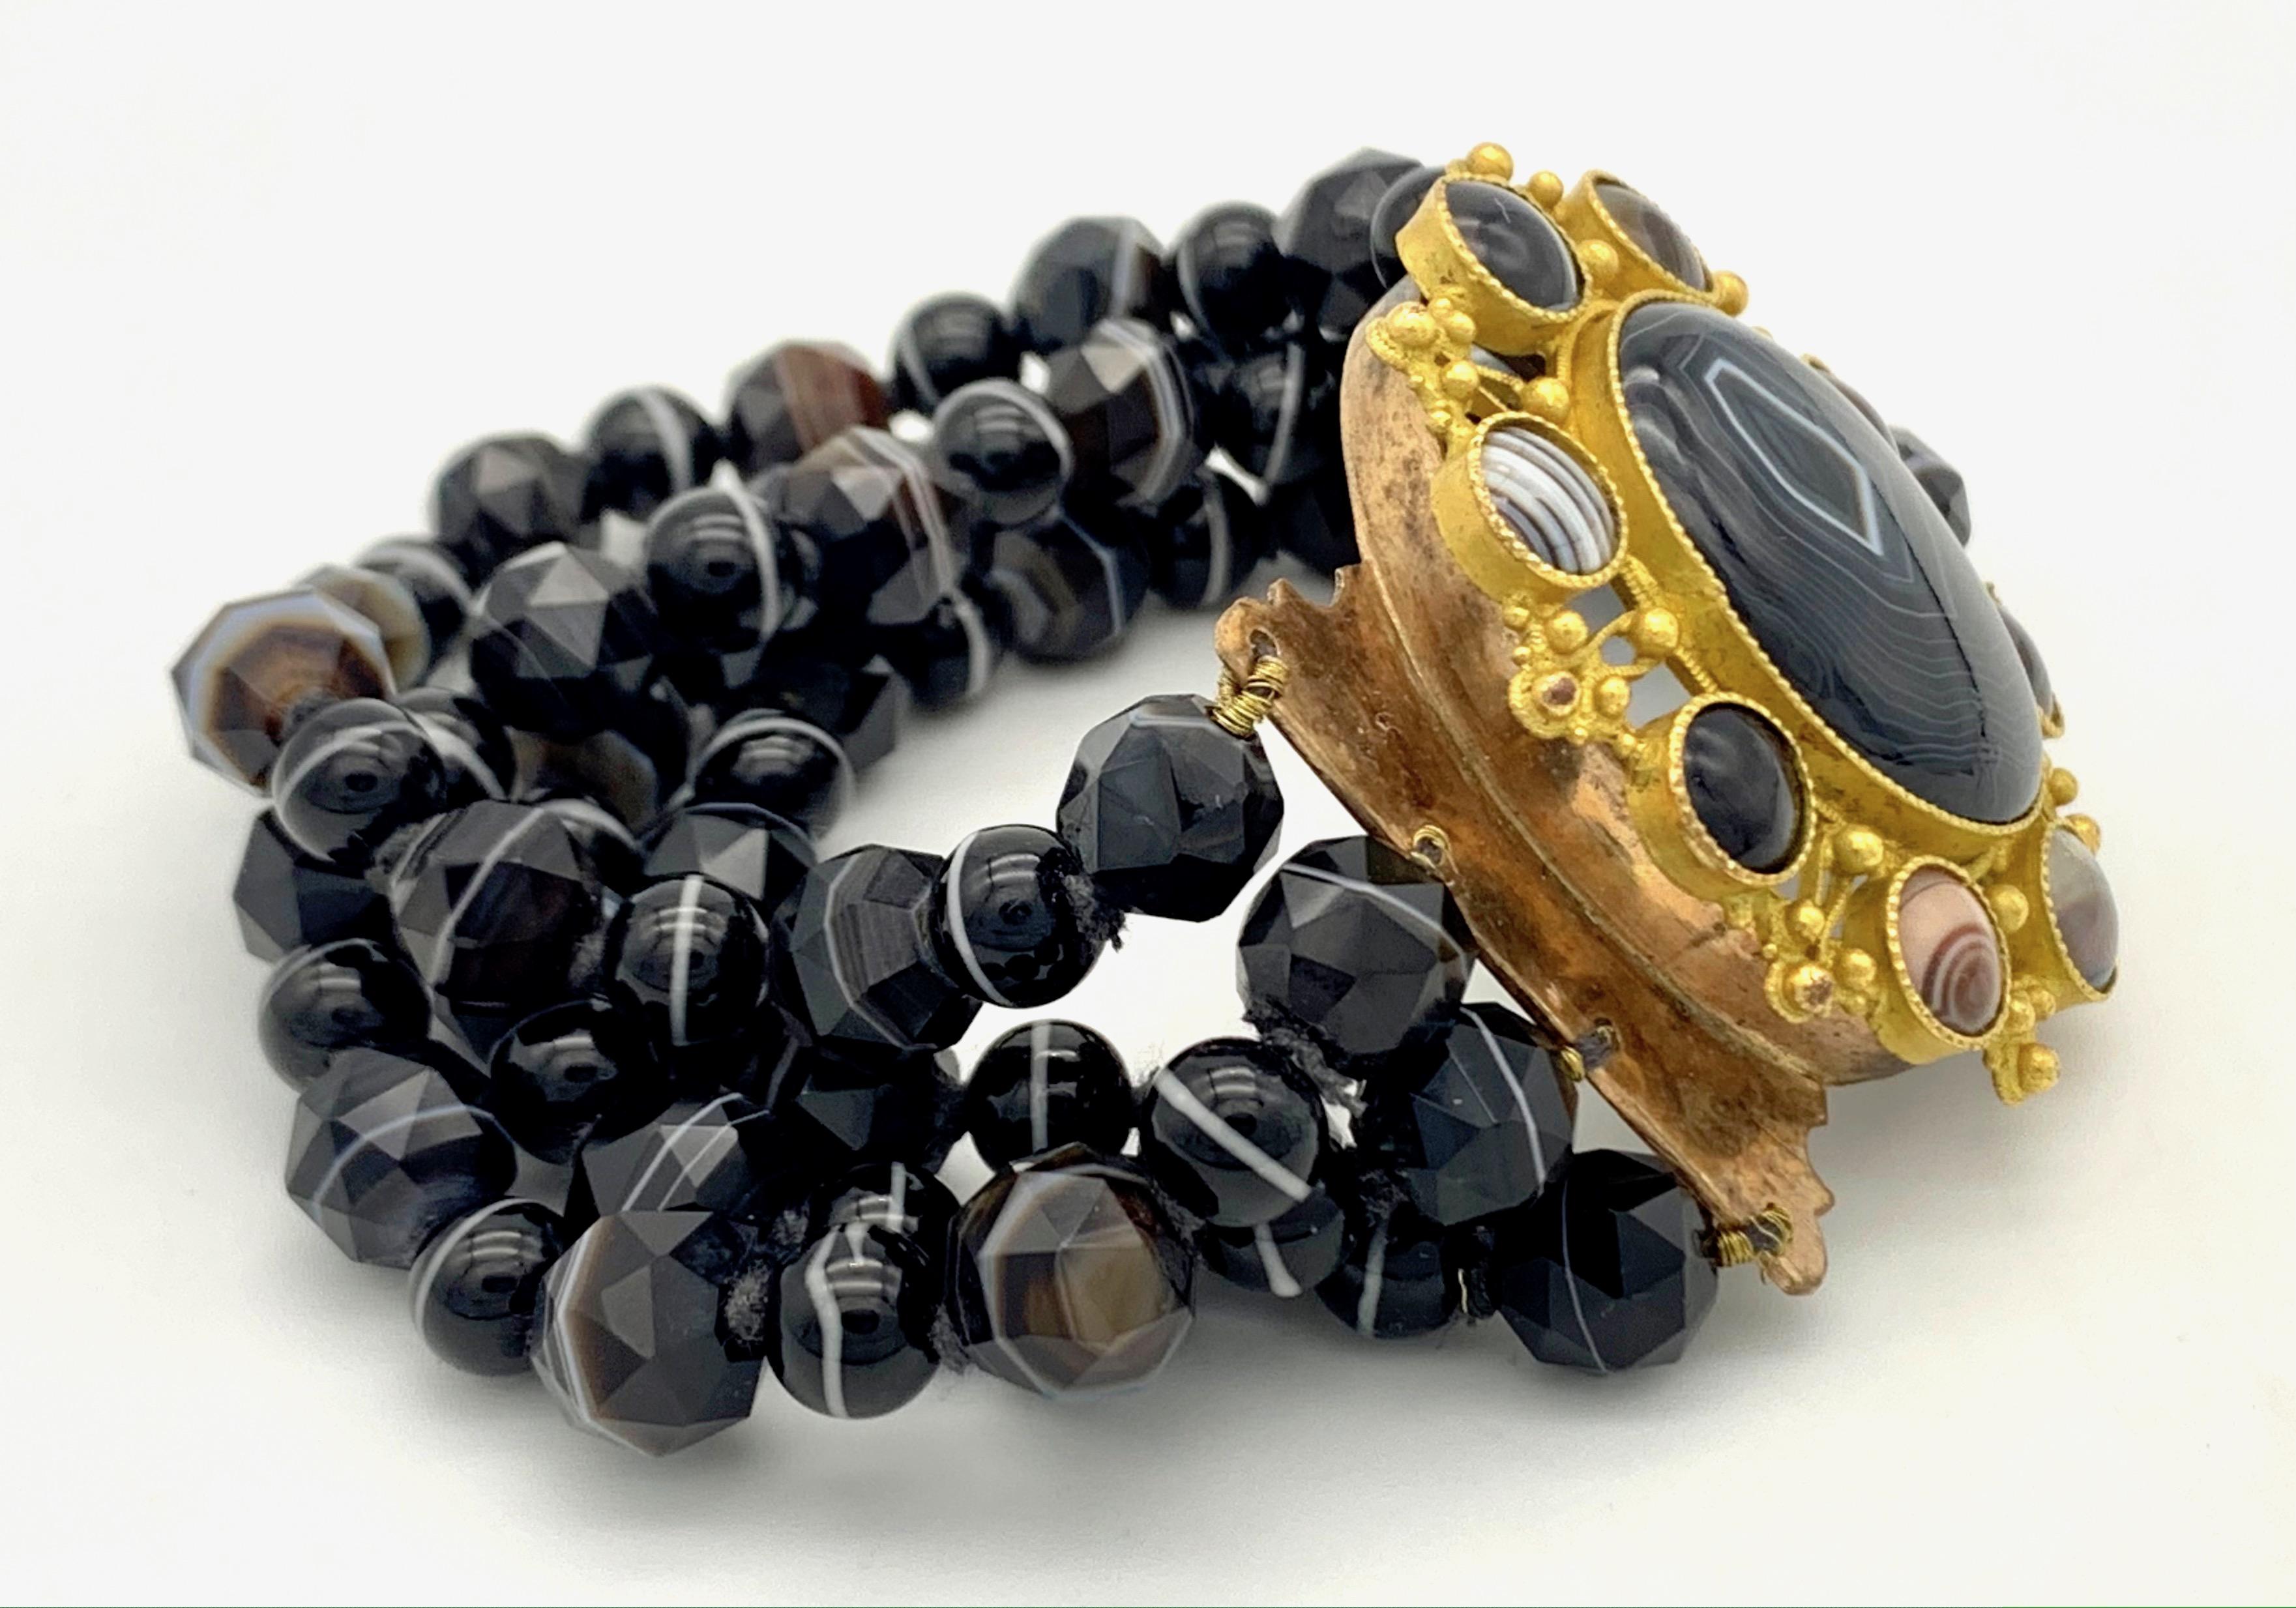 This stylish banded agate bracelet made up from 4 rows of fine agate beads comes with a beautiful clasp executed in gilt metal and Pinchbeek around 1830.